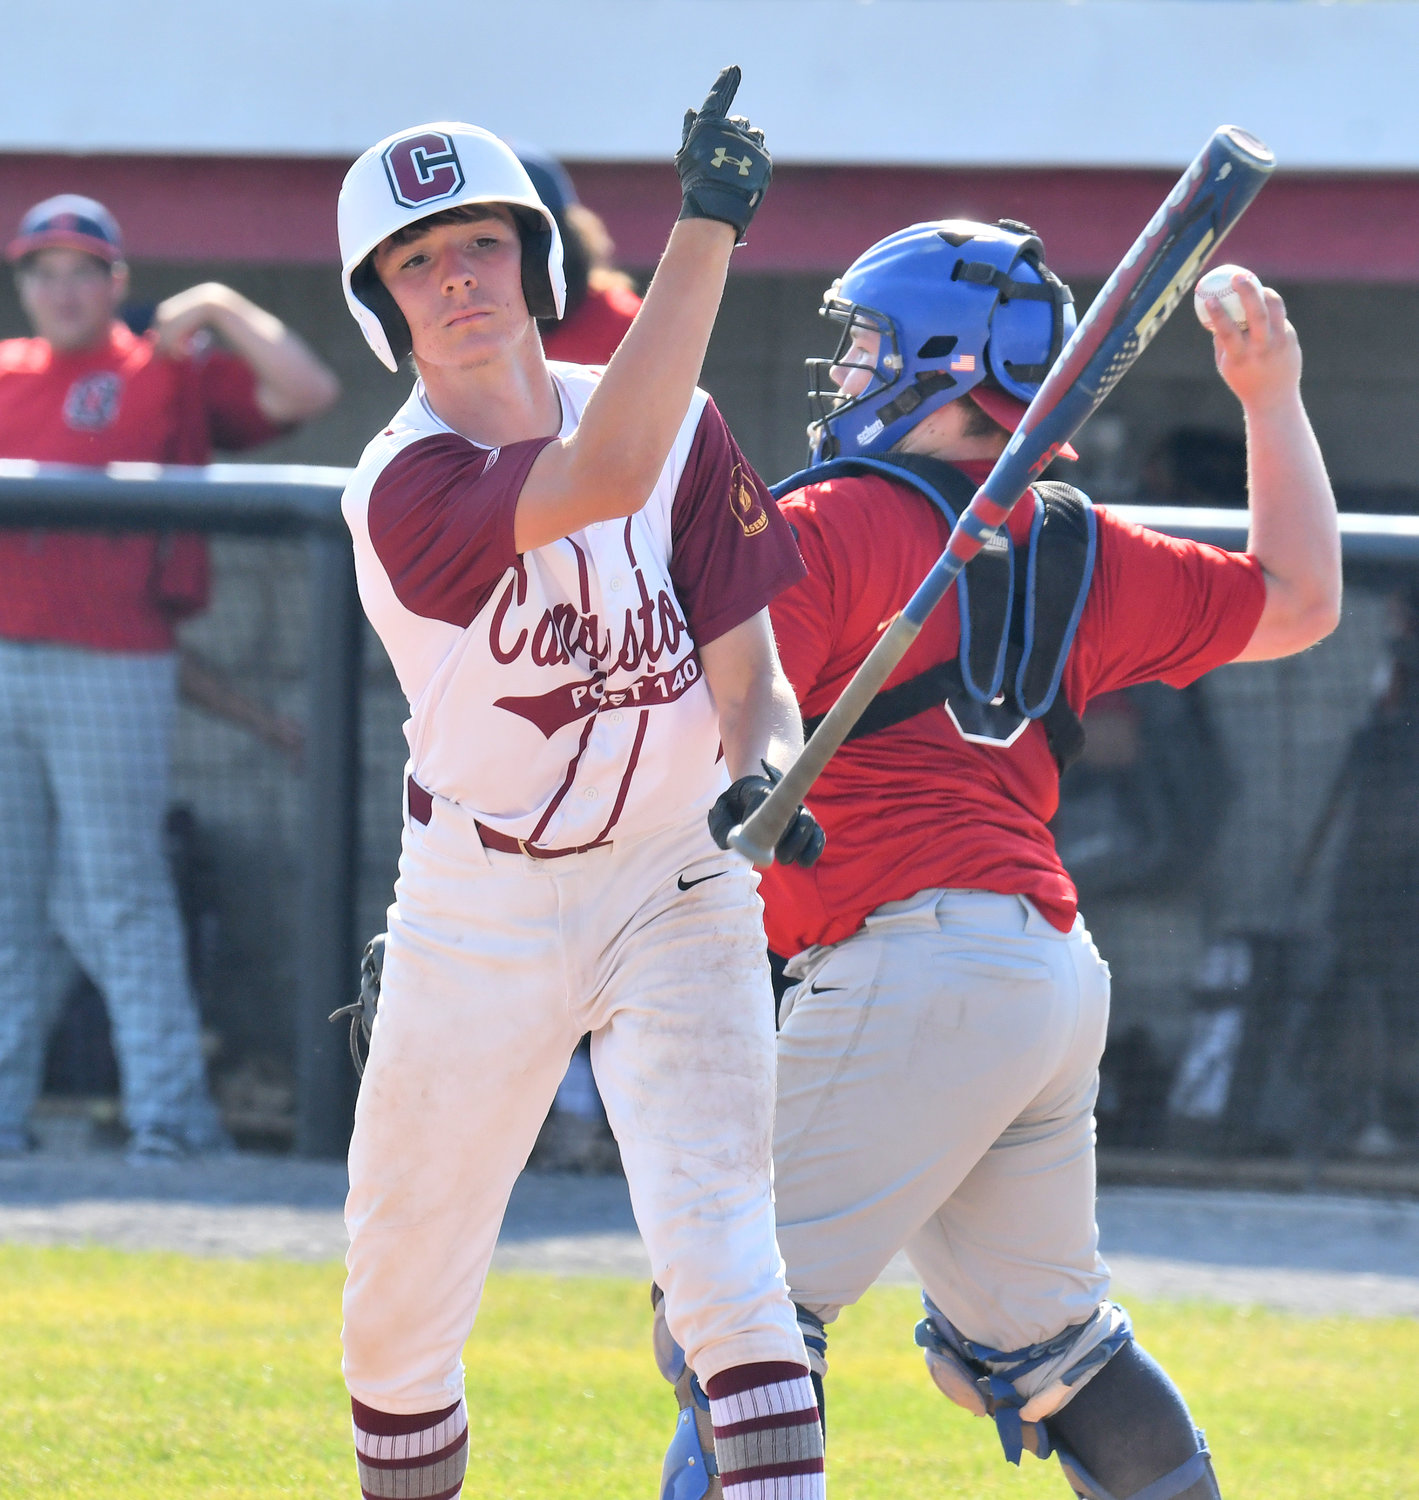 FREE PASS — Miller Post batter Logan Mead tosses his bat away after earning a walk in the first inning of Monday's District V American Legion baseball playoff game against Oriskany Post. Oriskany won 11-1 to advance to play top-seeded Whitestown Post at 5:15 p.m. Wednesday at DeLutis Field in Rome.